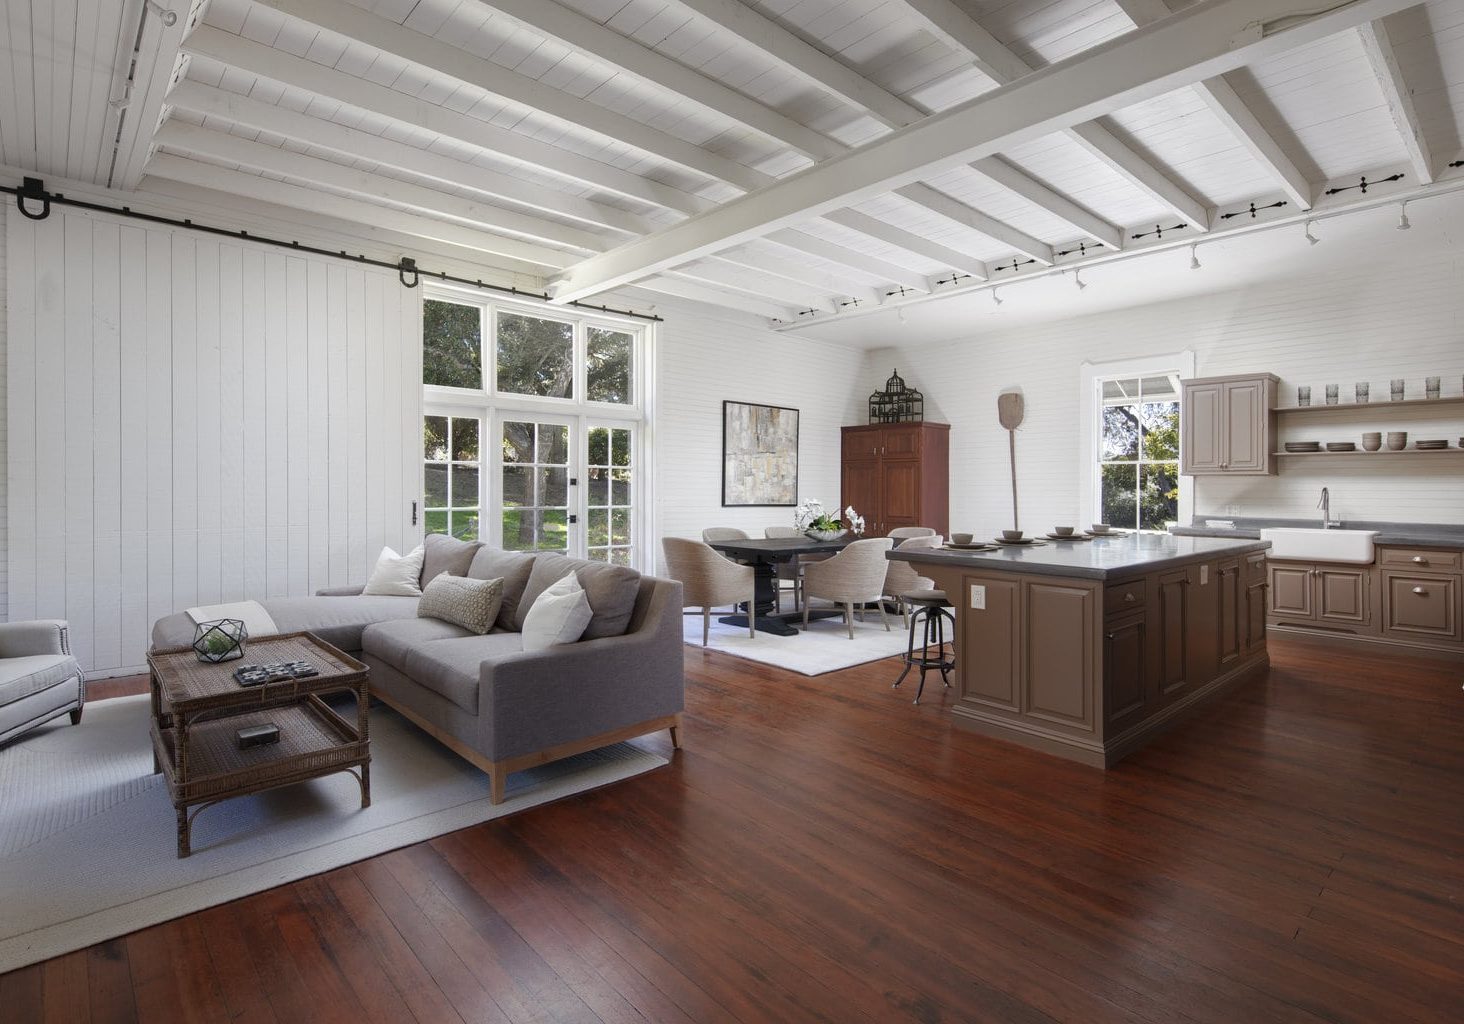 kitchen-and-dining-room-of-a-ranch-style-equestrian-home-in-carpinteria